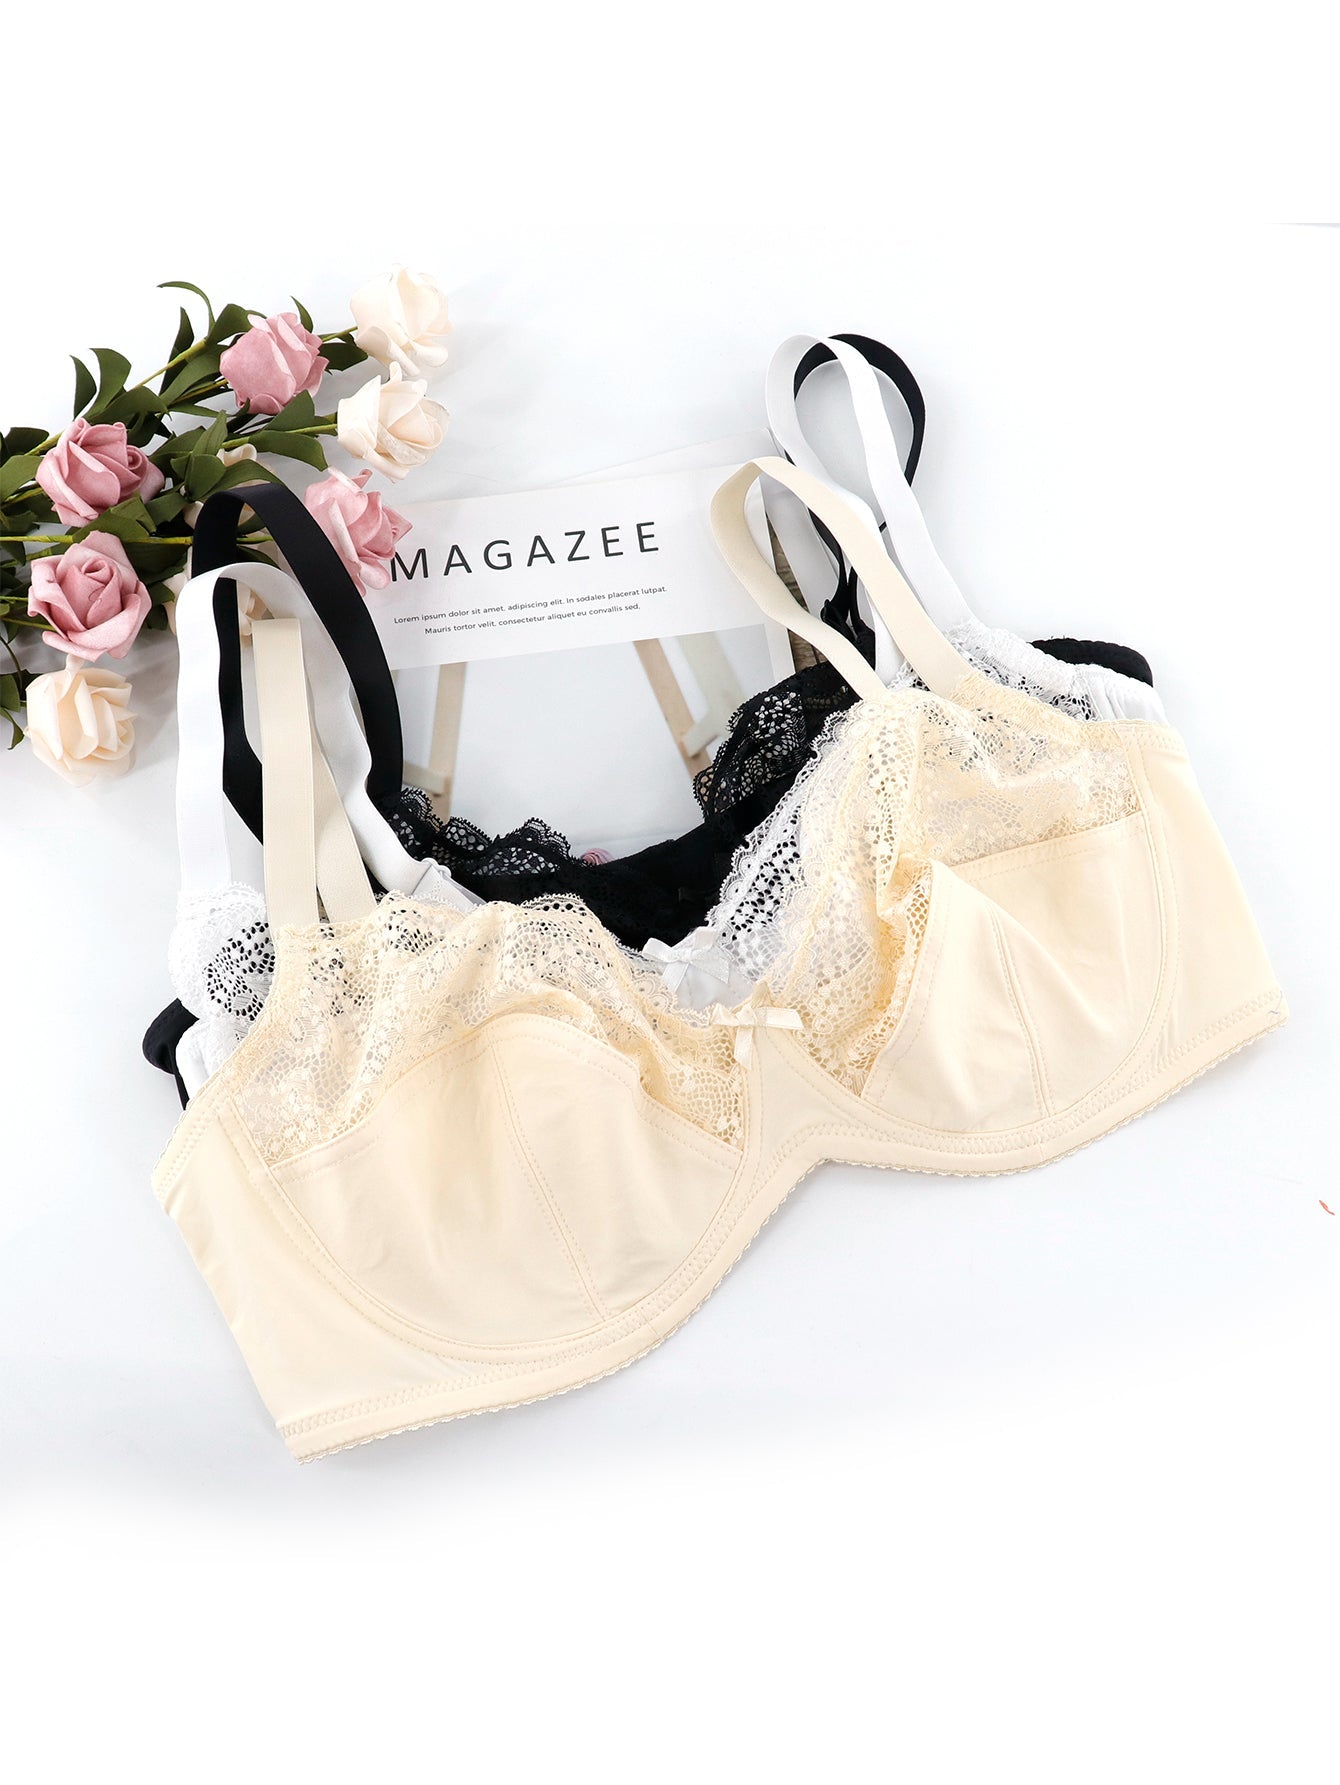 Floral Lace Bras Sexy Perspective for Women Lingerie Plus Size Comfort Underwear Unlined Adjusted Strap Sai Feel